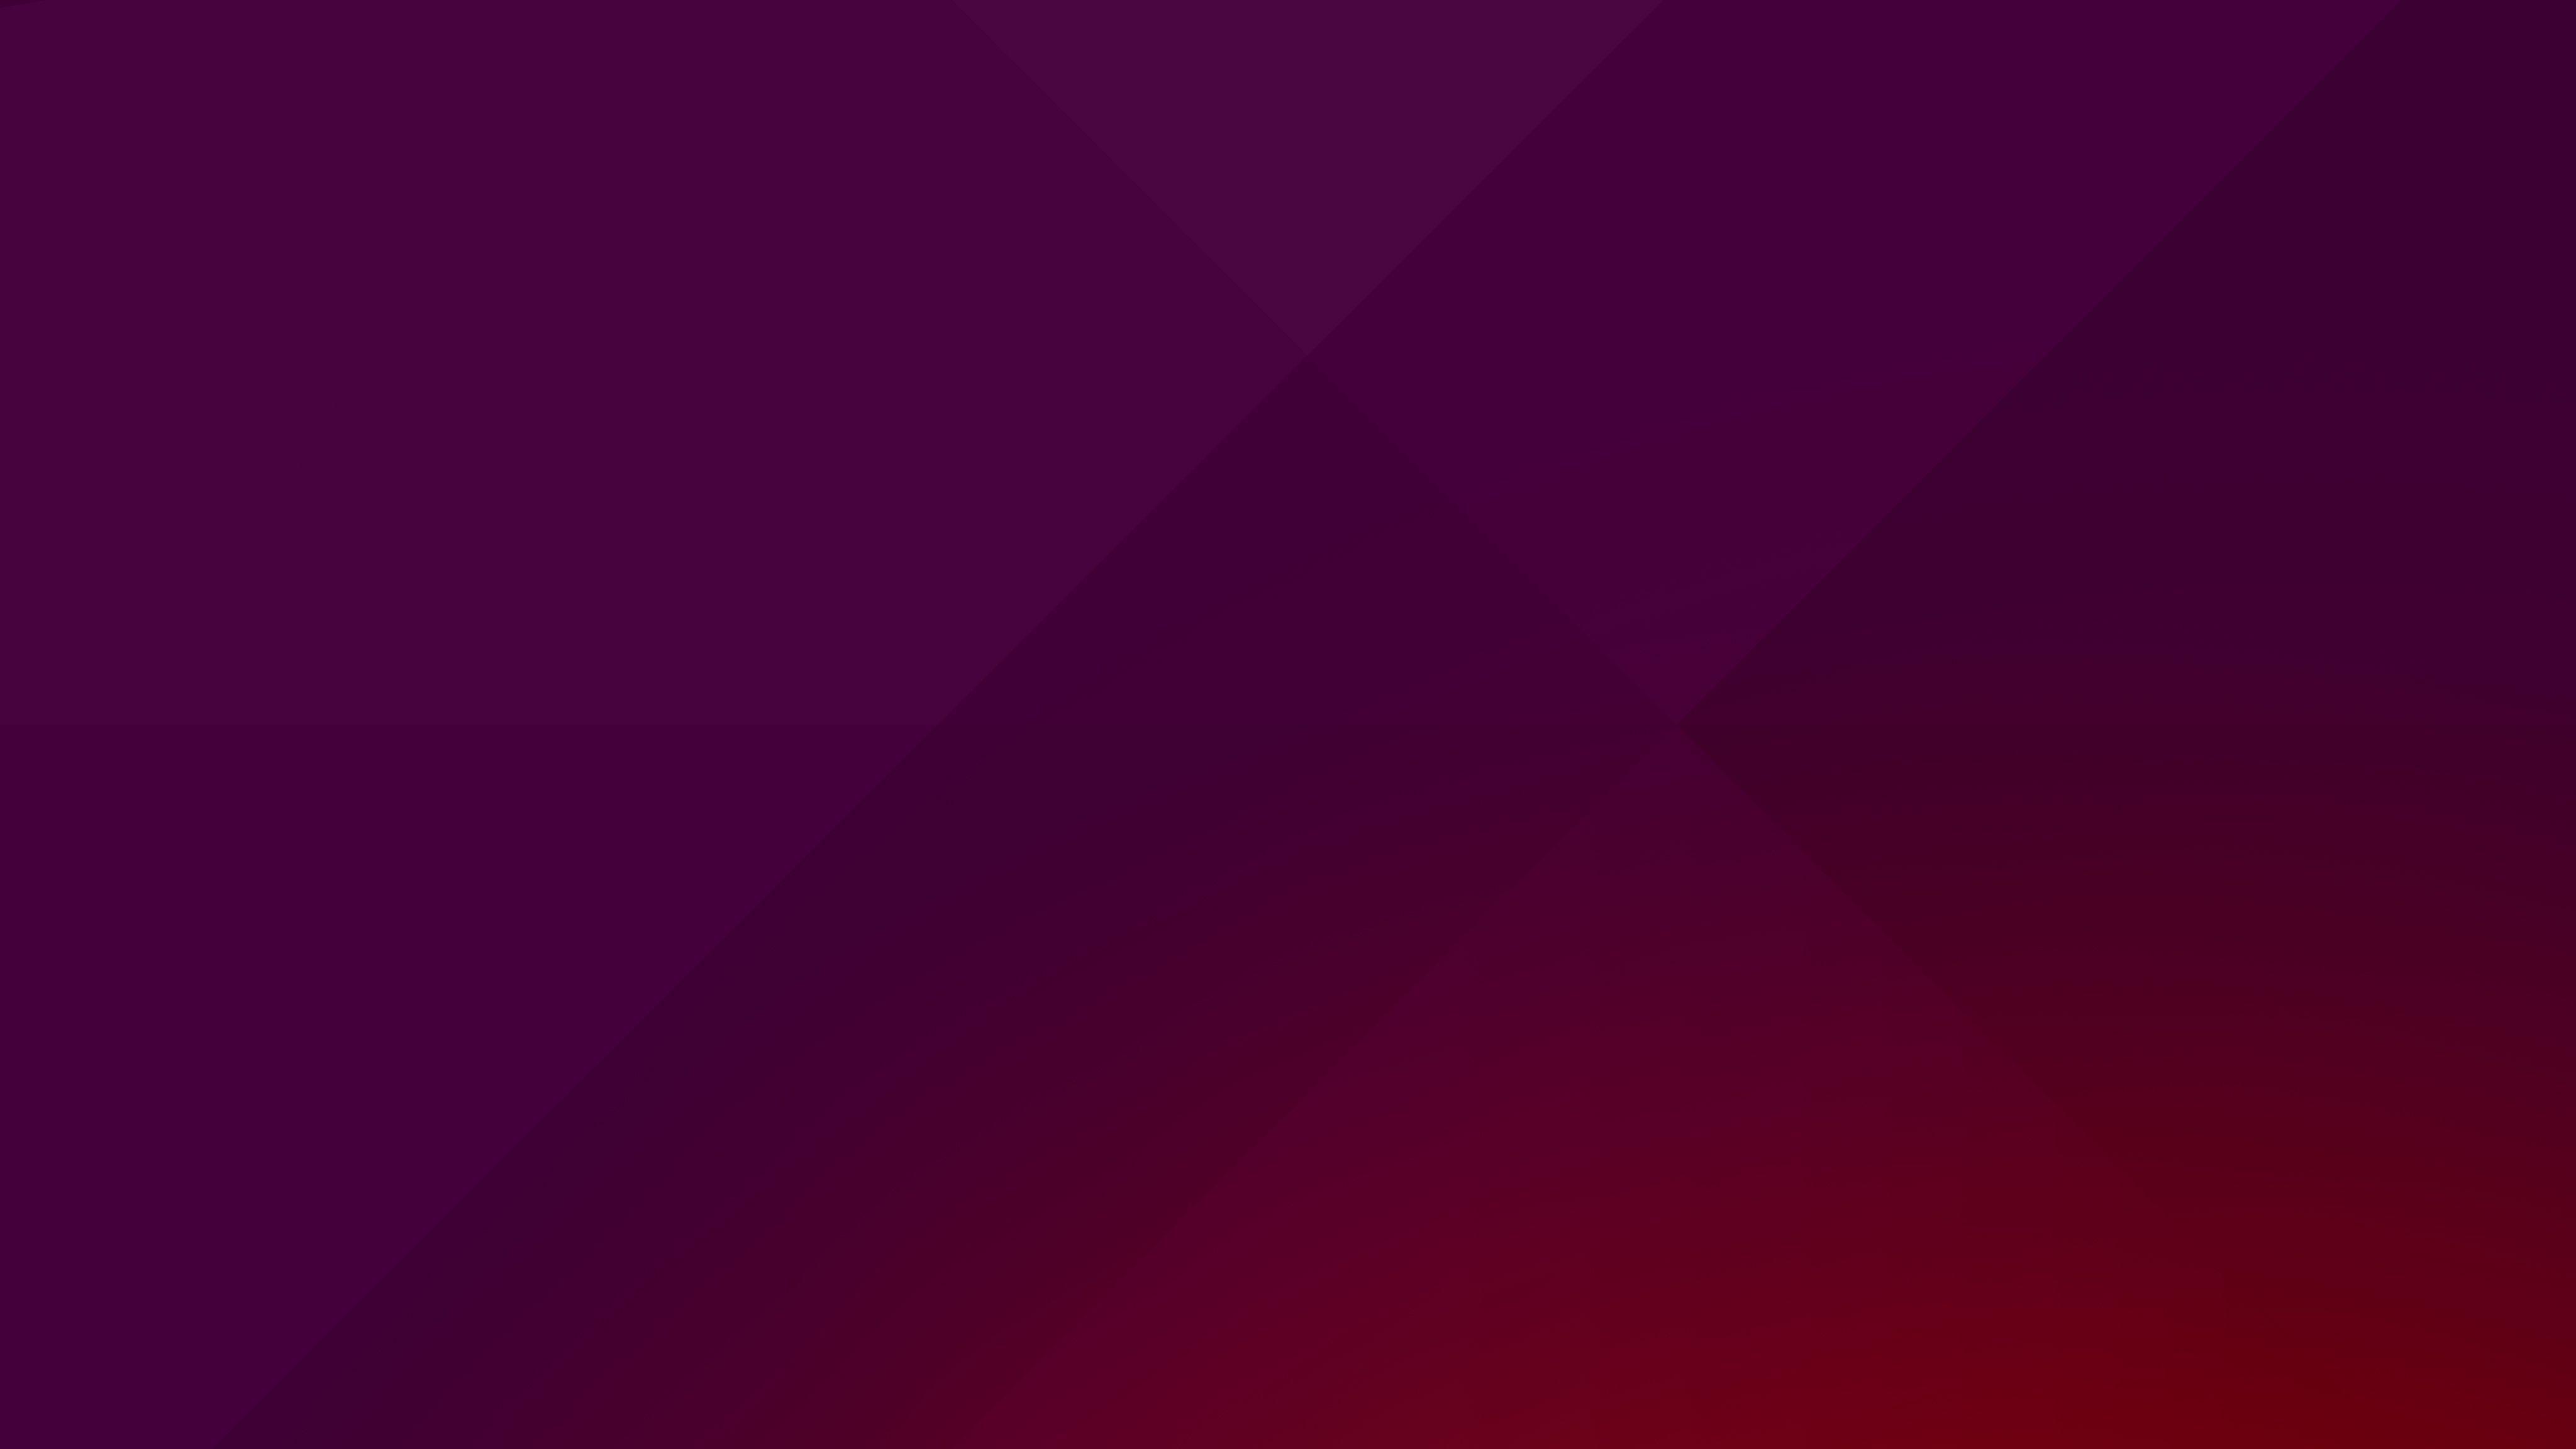 This Is The New Ubuntu 15.04 Wallpaper